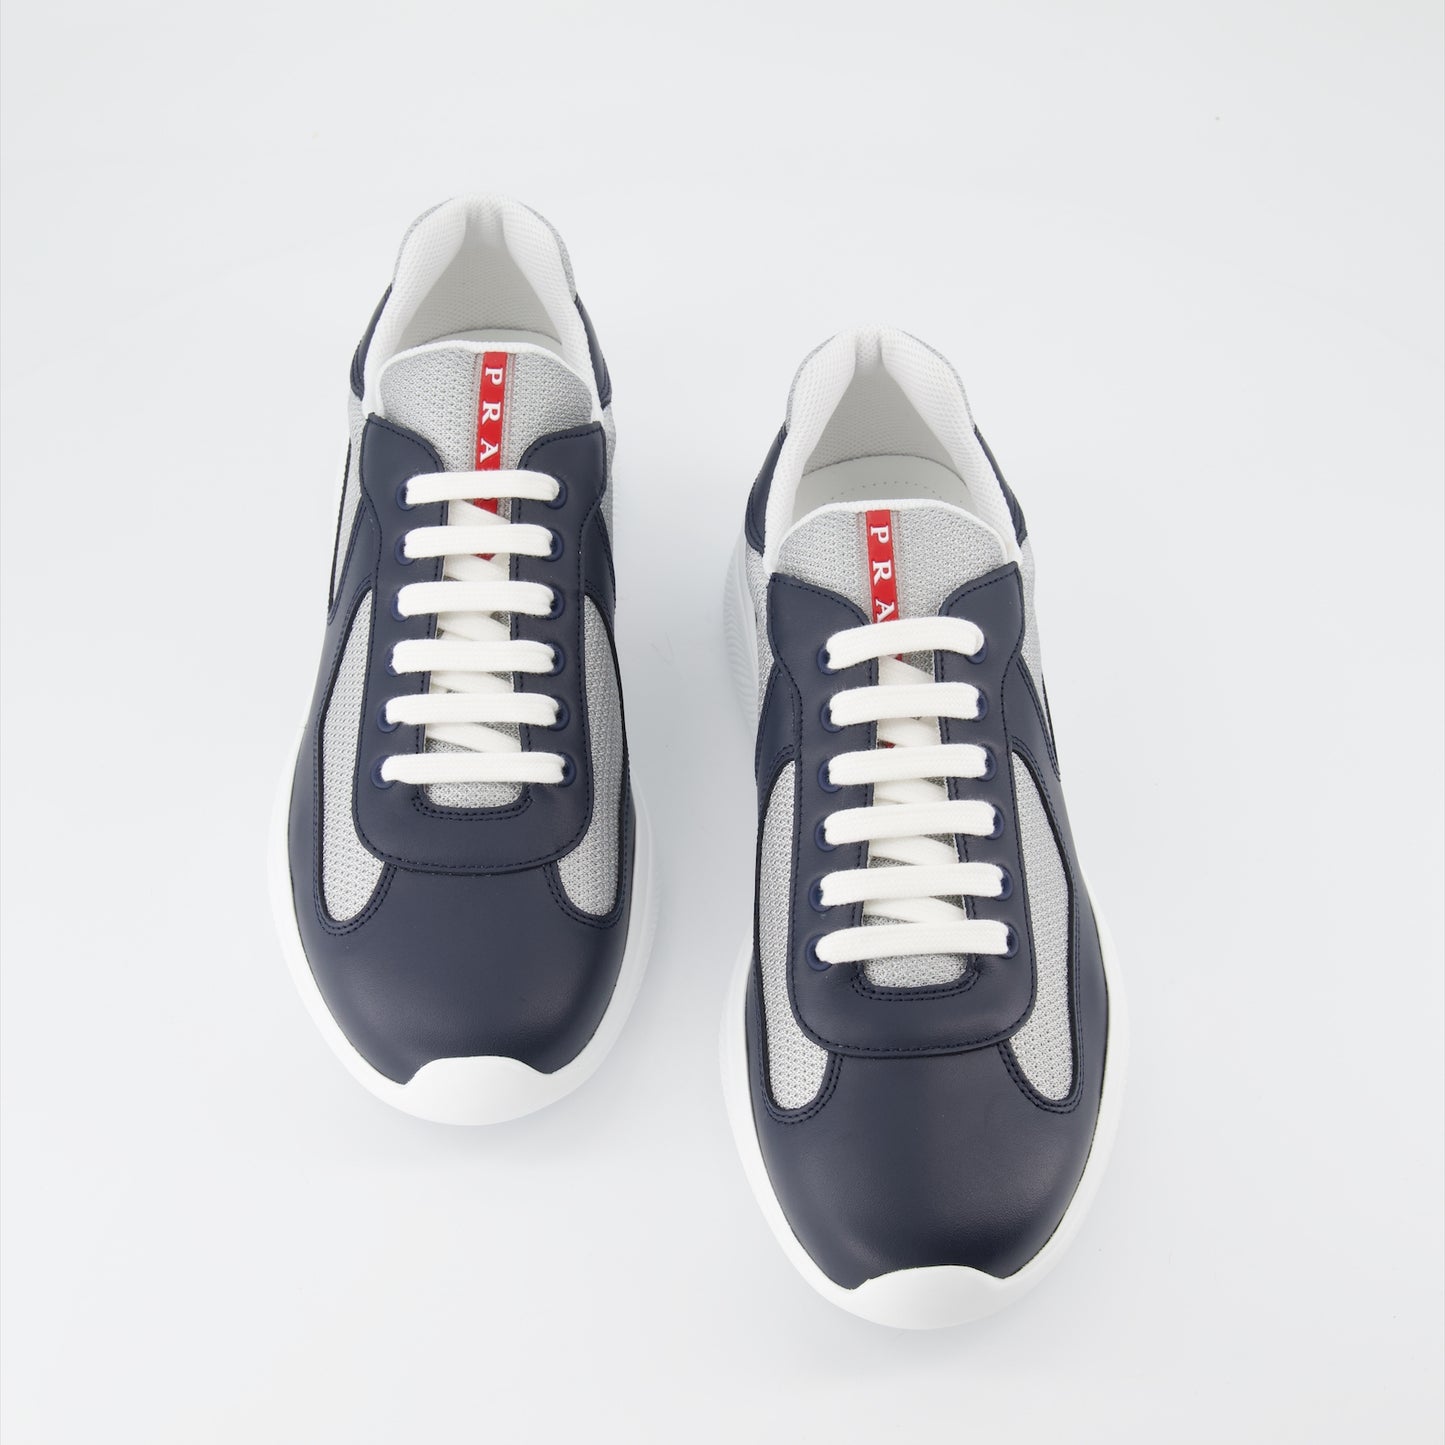 America's Cup sneakers